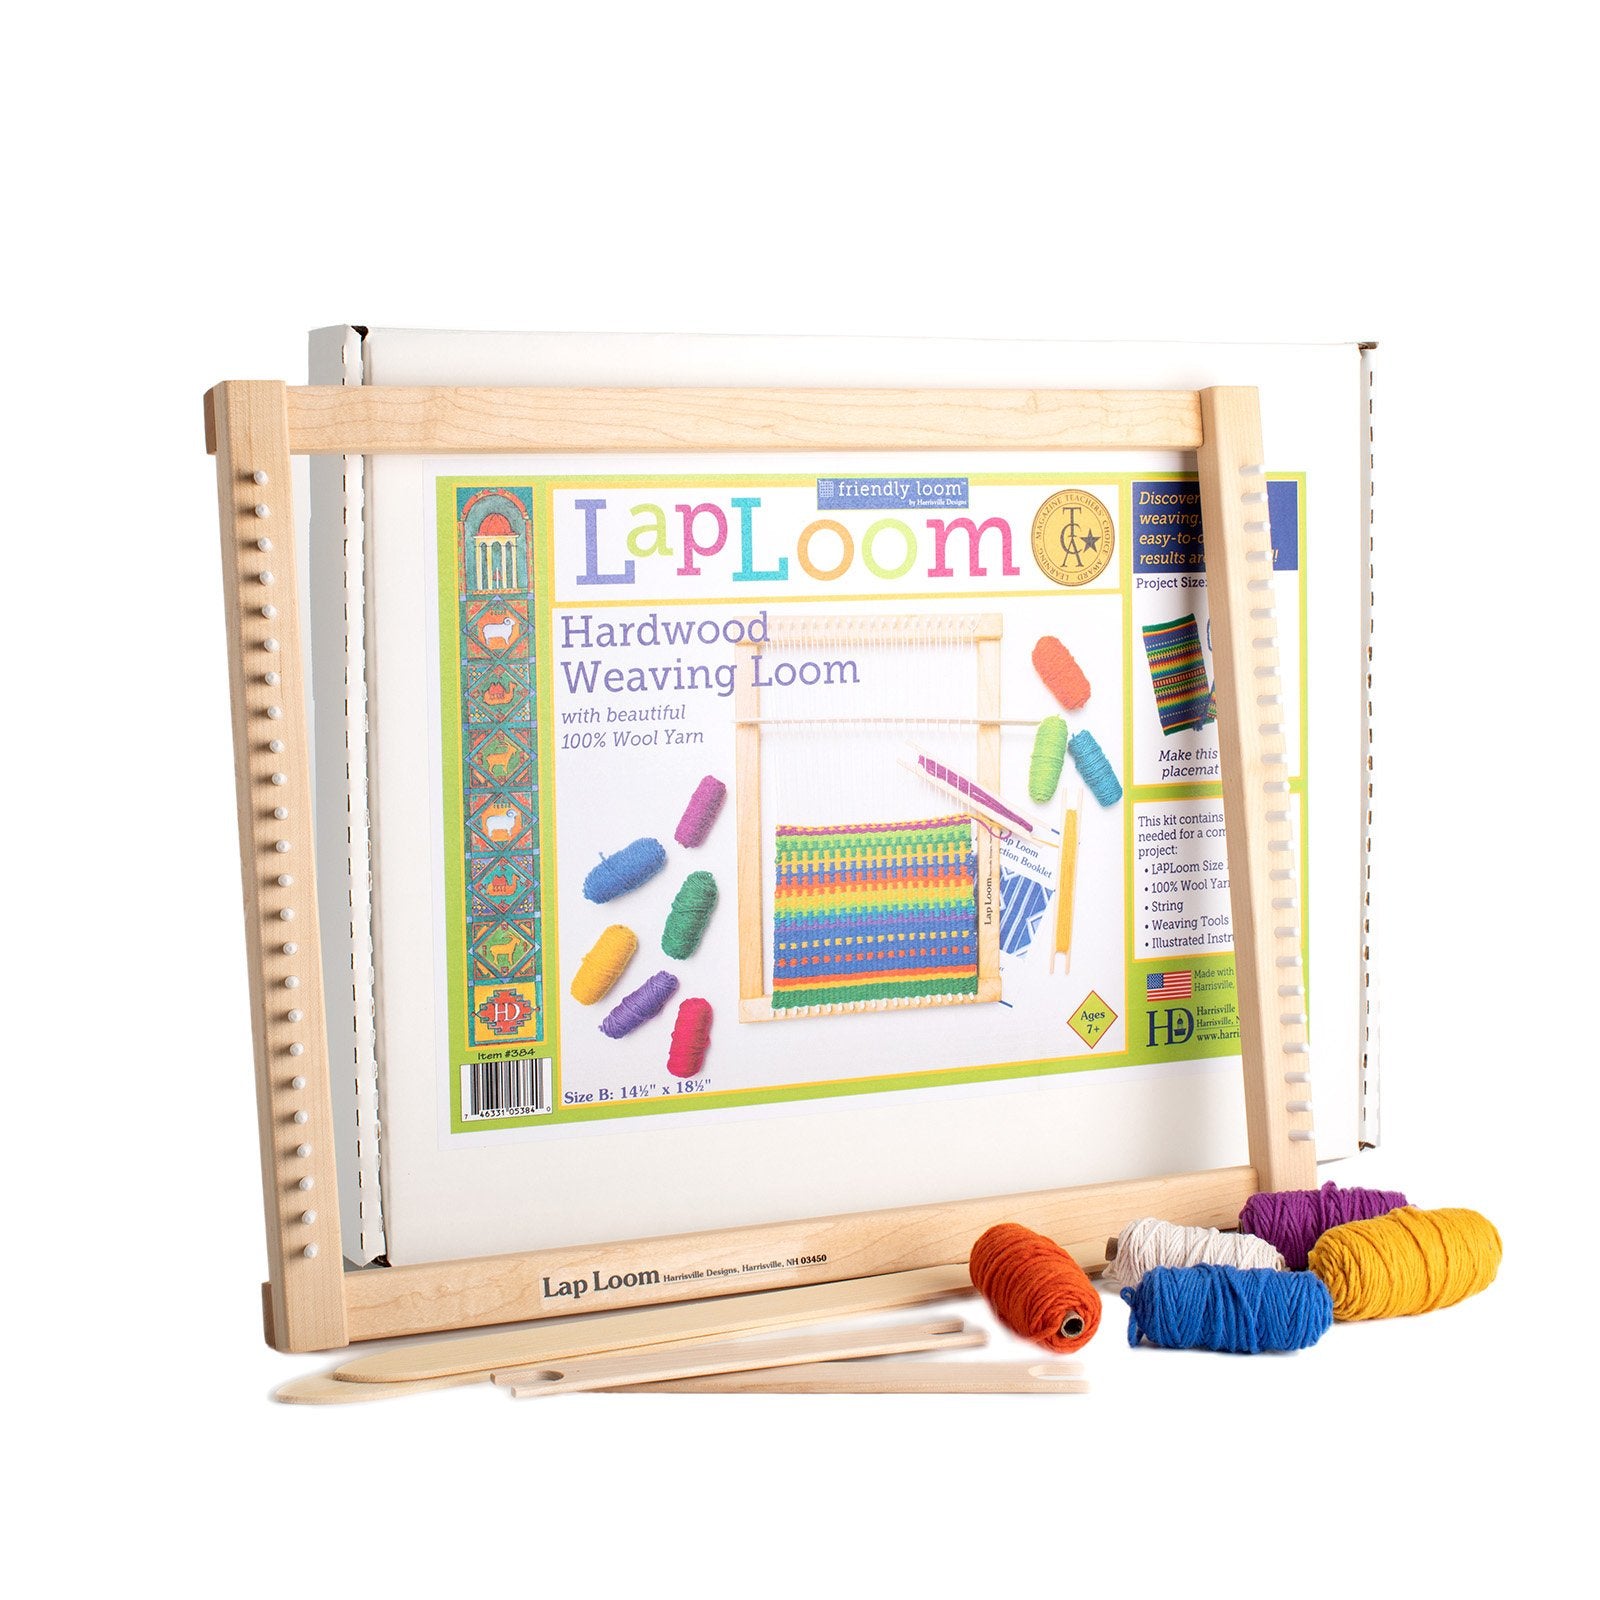 7 Potholder Loom DELUXE (Traditional Size)